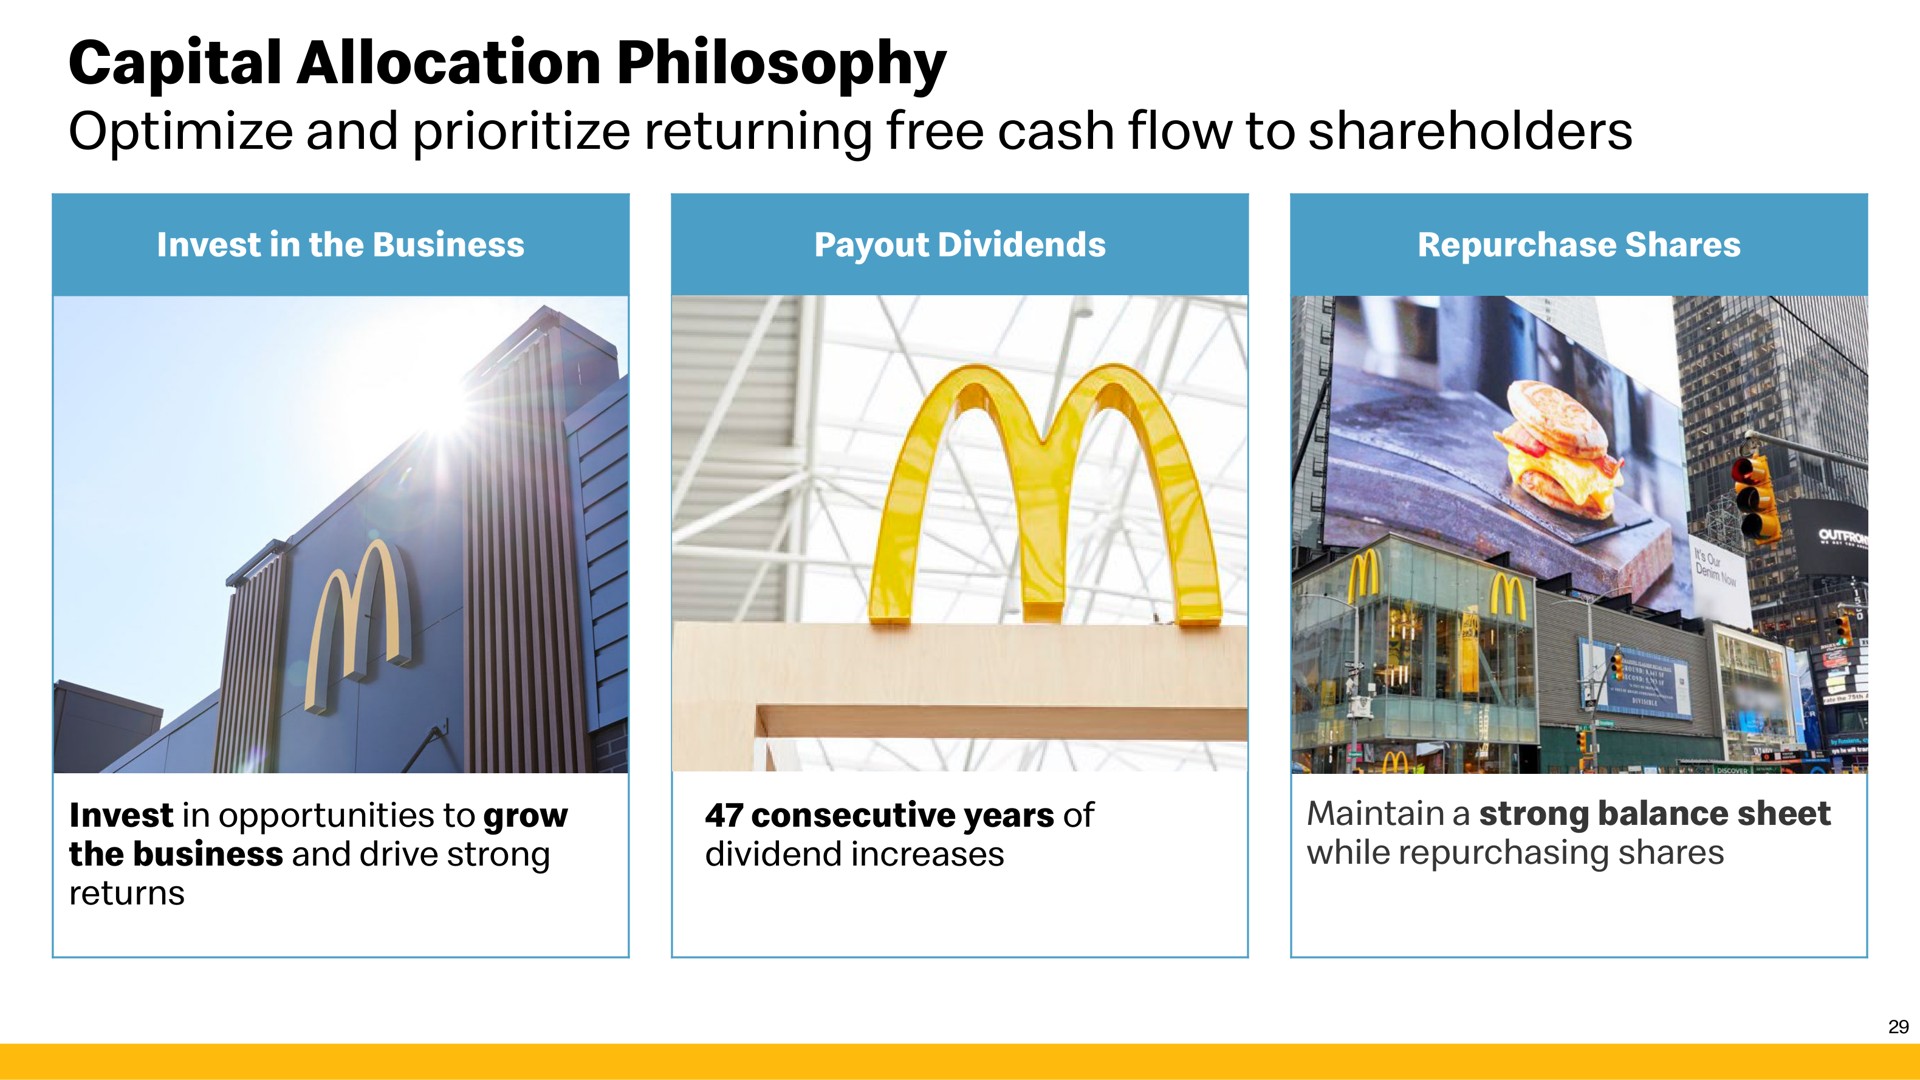 capital allocation philosophy optimize and returning free cash flow to shareholders | McDonald's